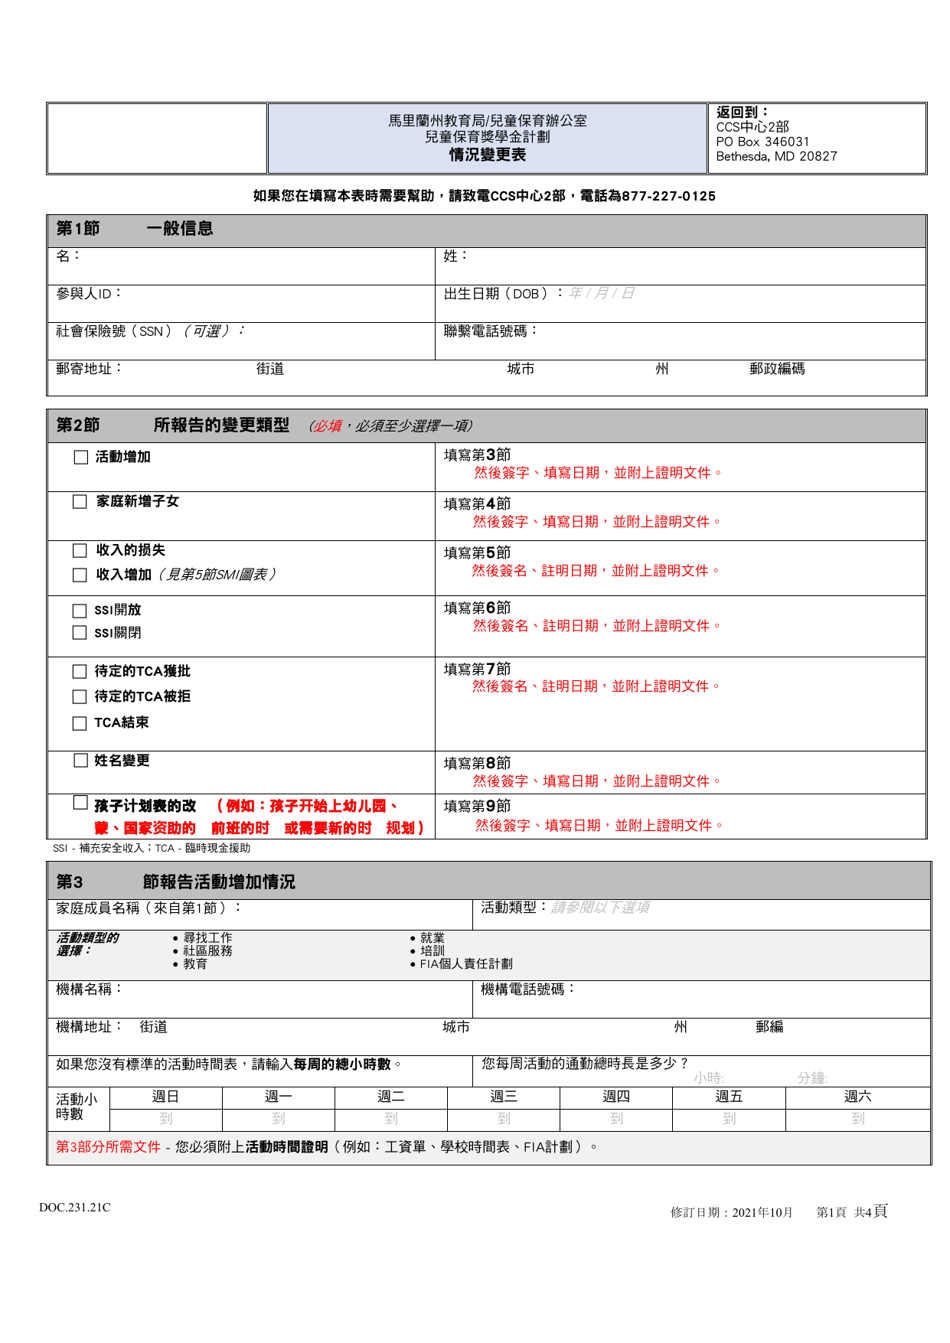 Form DOC.231.21C Circumstance Change Form - Maryland (Chinese), Page 1